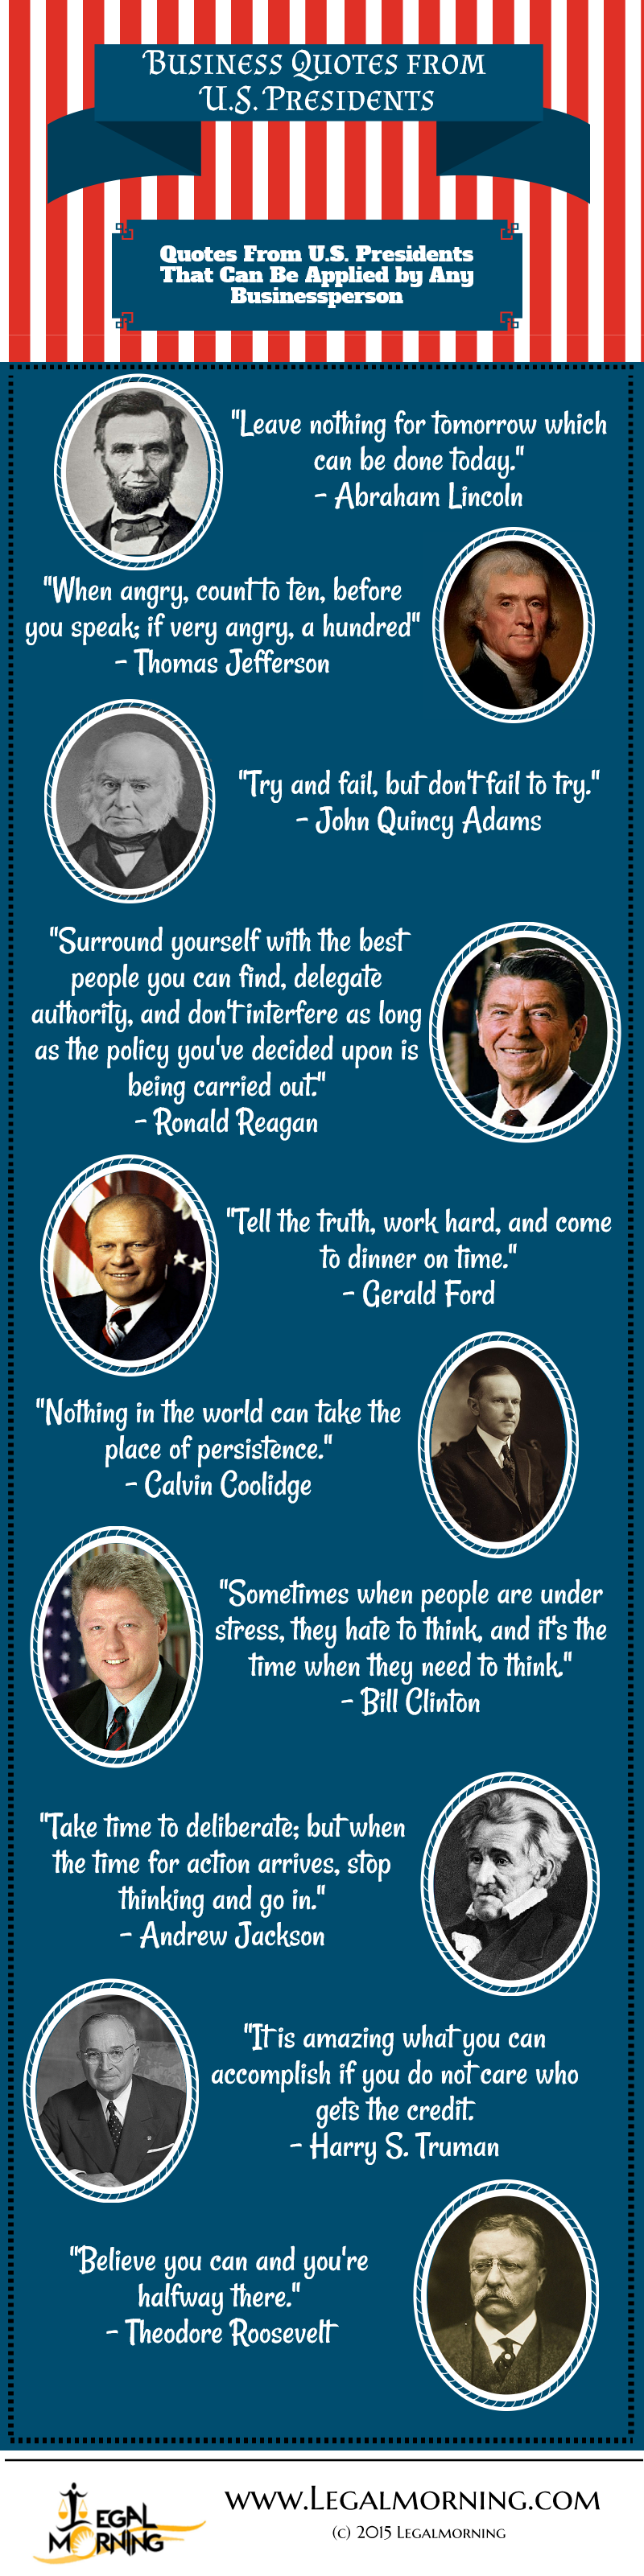 OB欧宝娱乐体育Business-Quotes-from-U.S.-Presidents-1